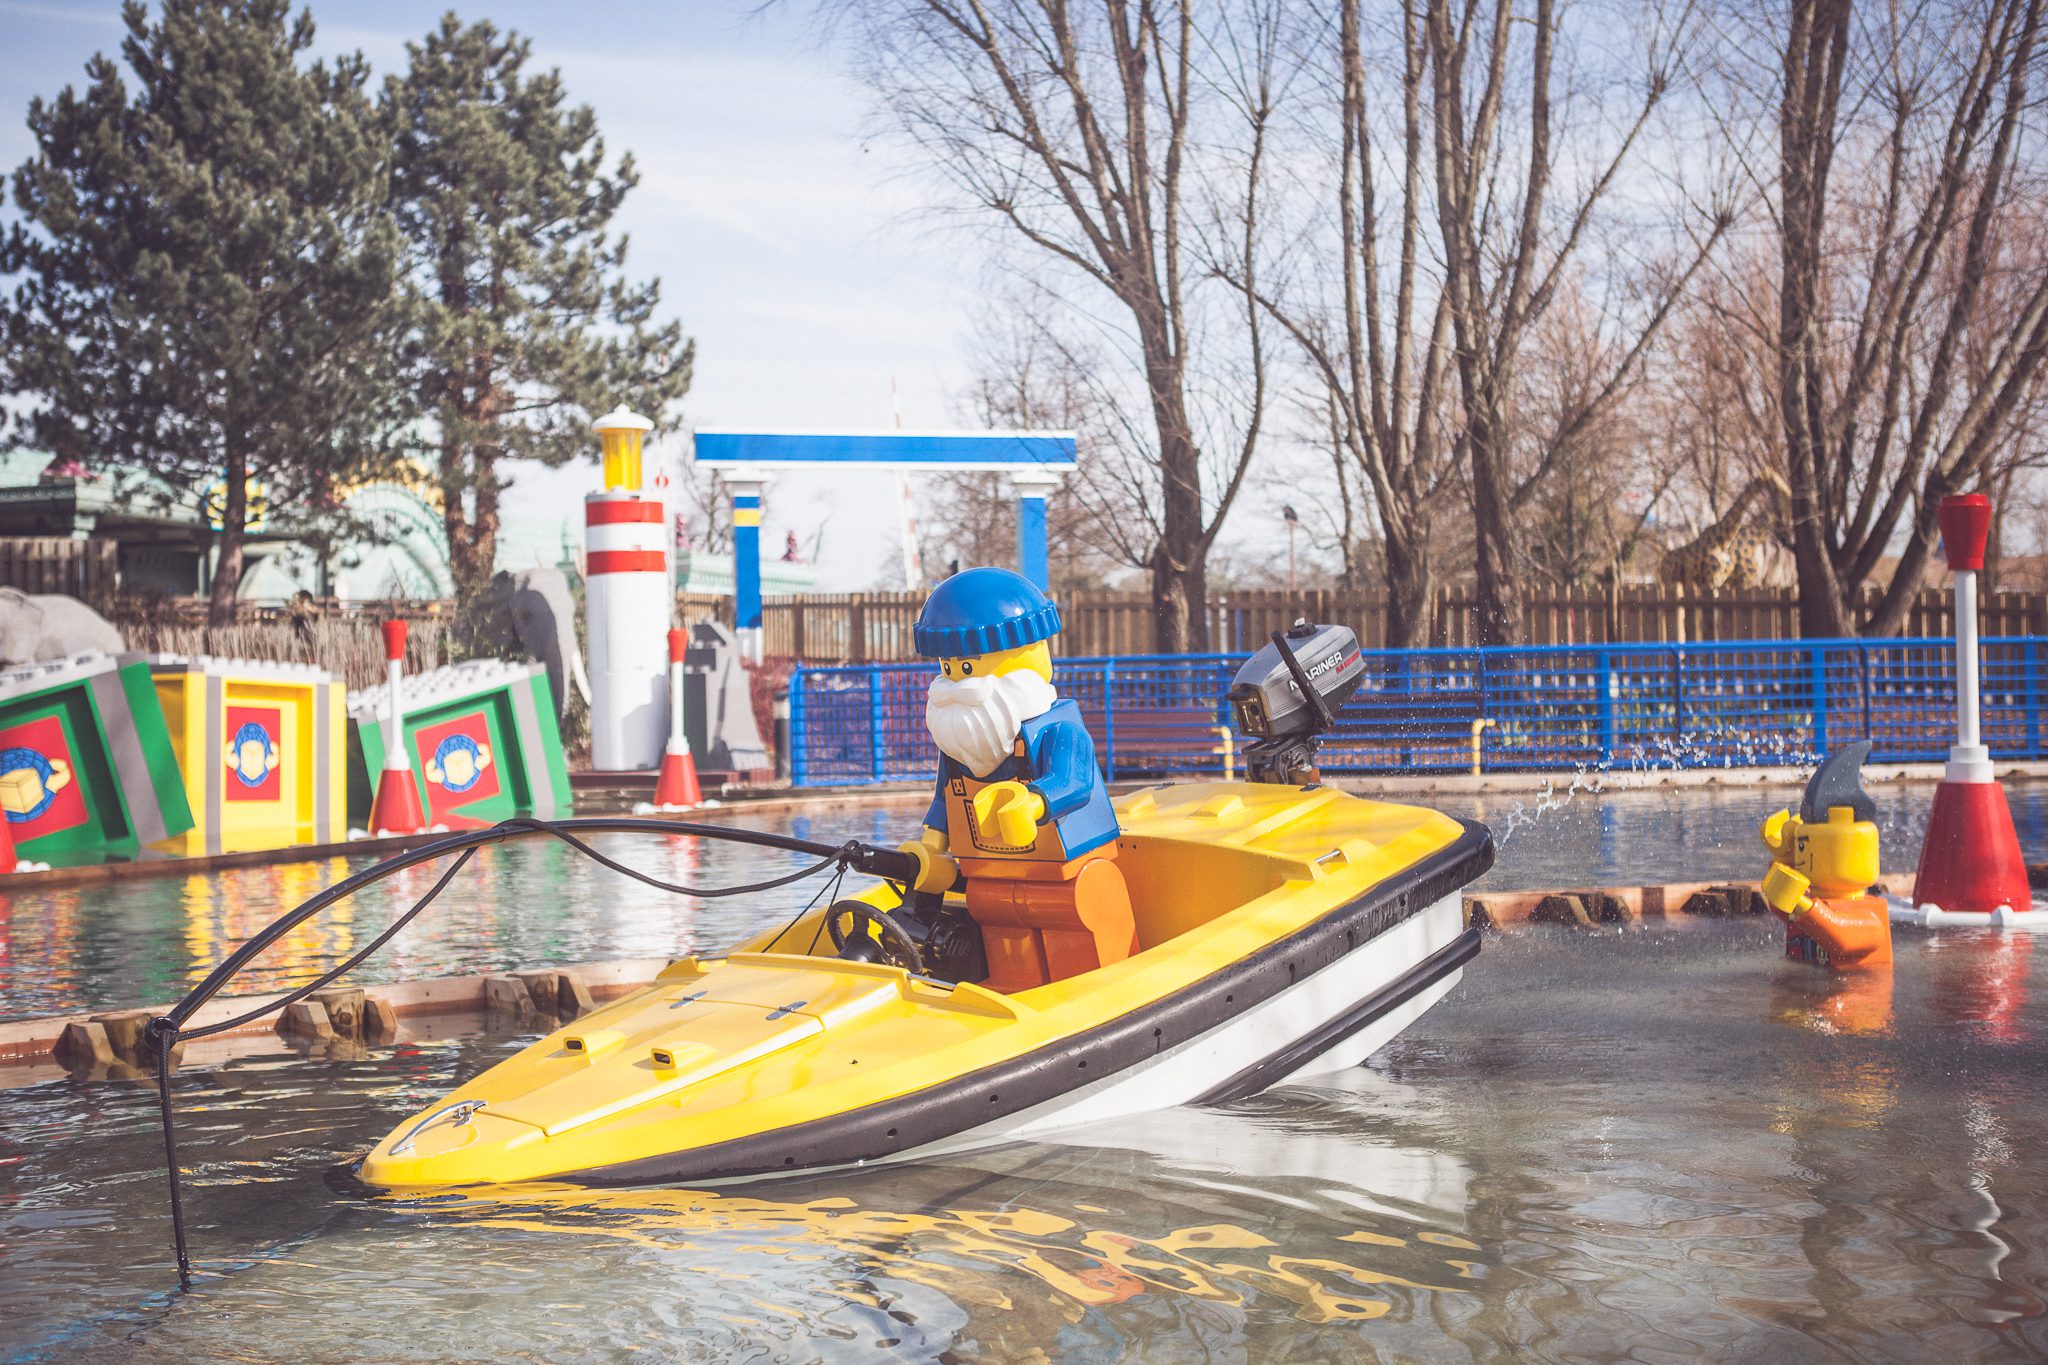 A water LEGO themed ride area with a yellow LEGO boat